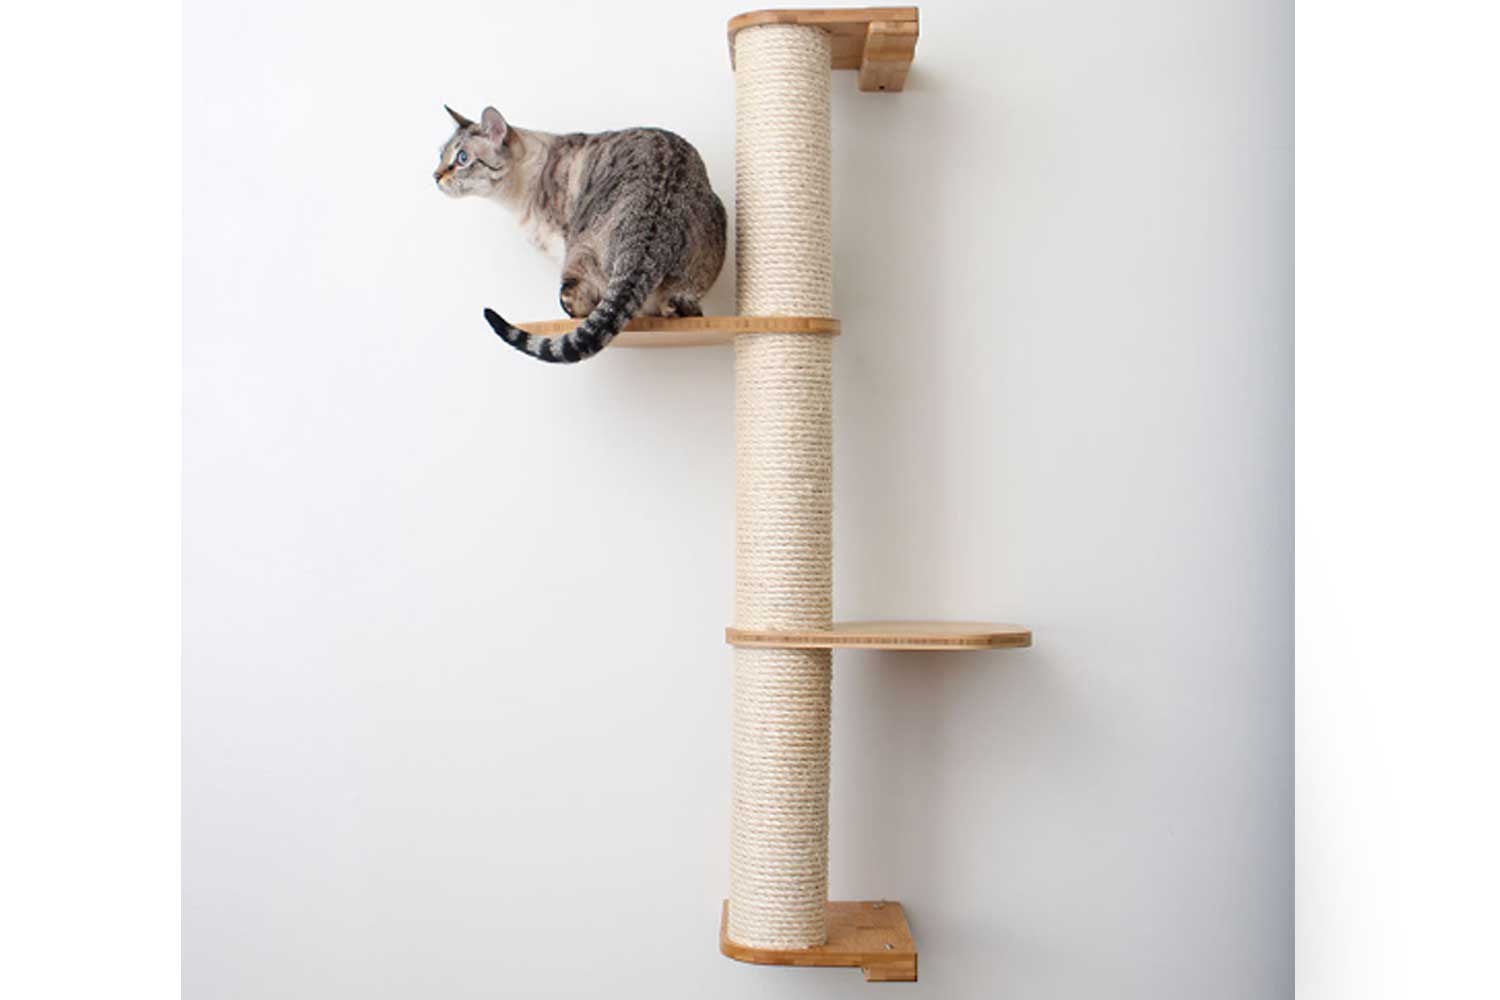 This photo displays our cat climbing a three tier Sisal Pole that has two additional Leaf Connectors. The Sisal Pole and Leaf Connectors shown are in Natural, a light brown stain.